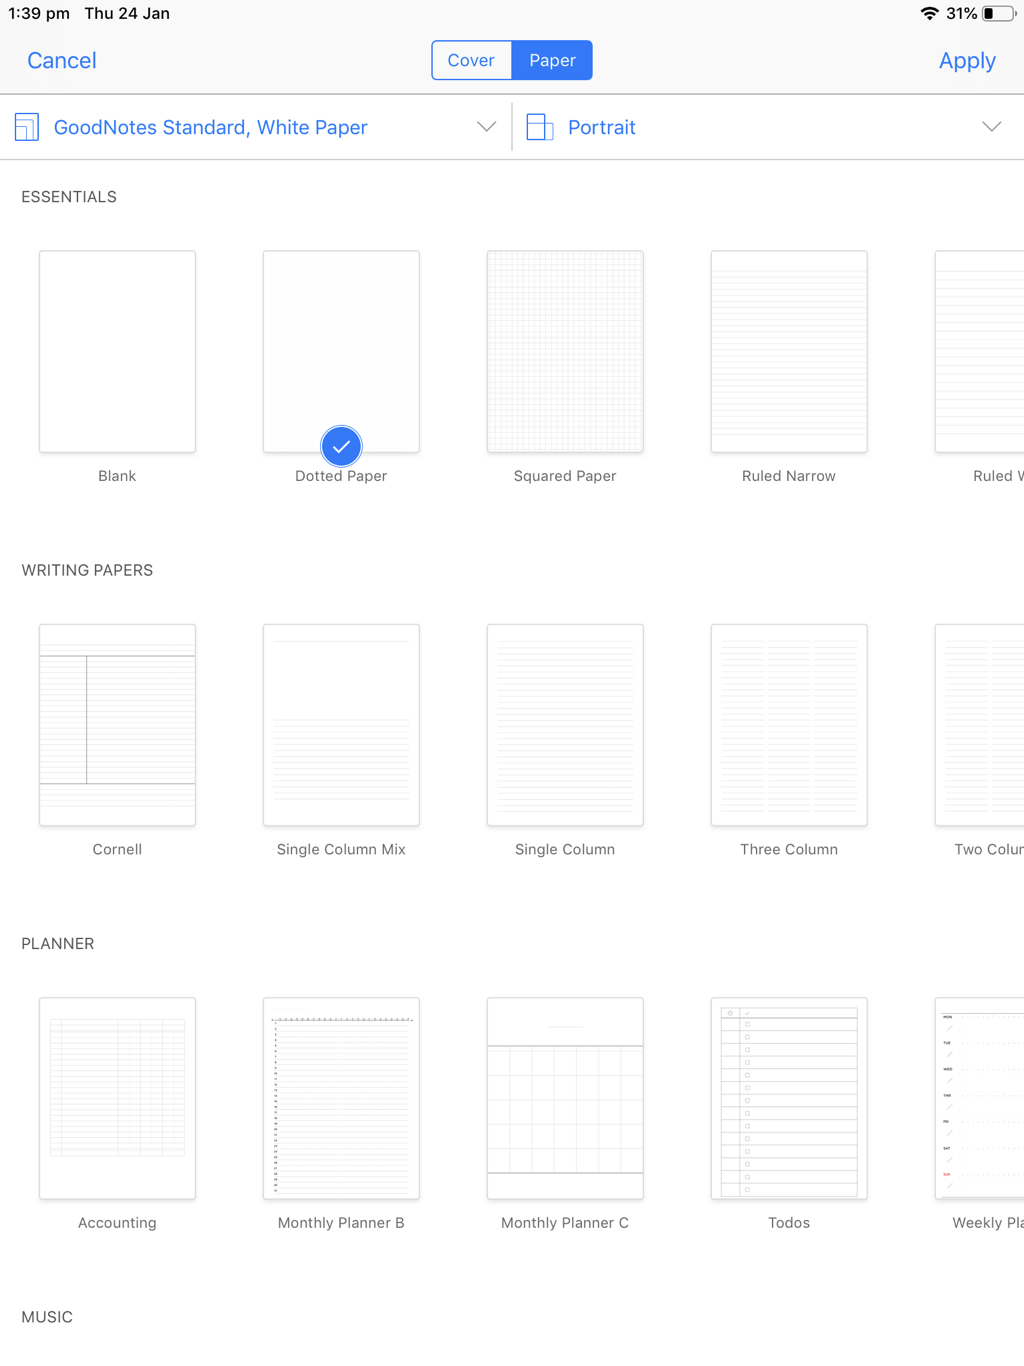 goodnotes 5 planner template